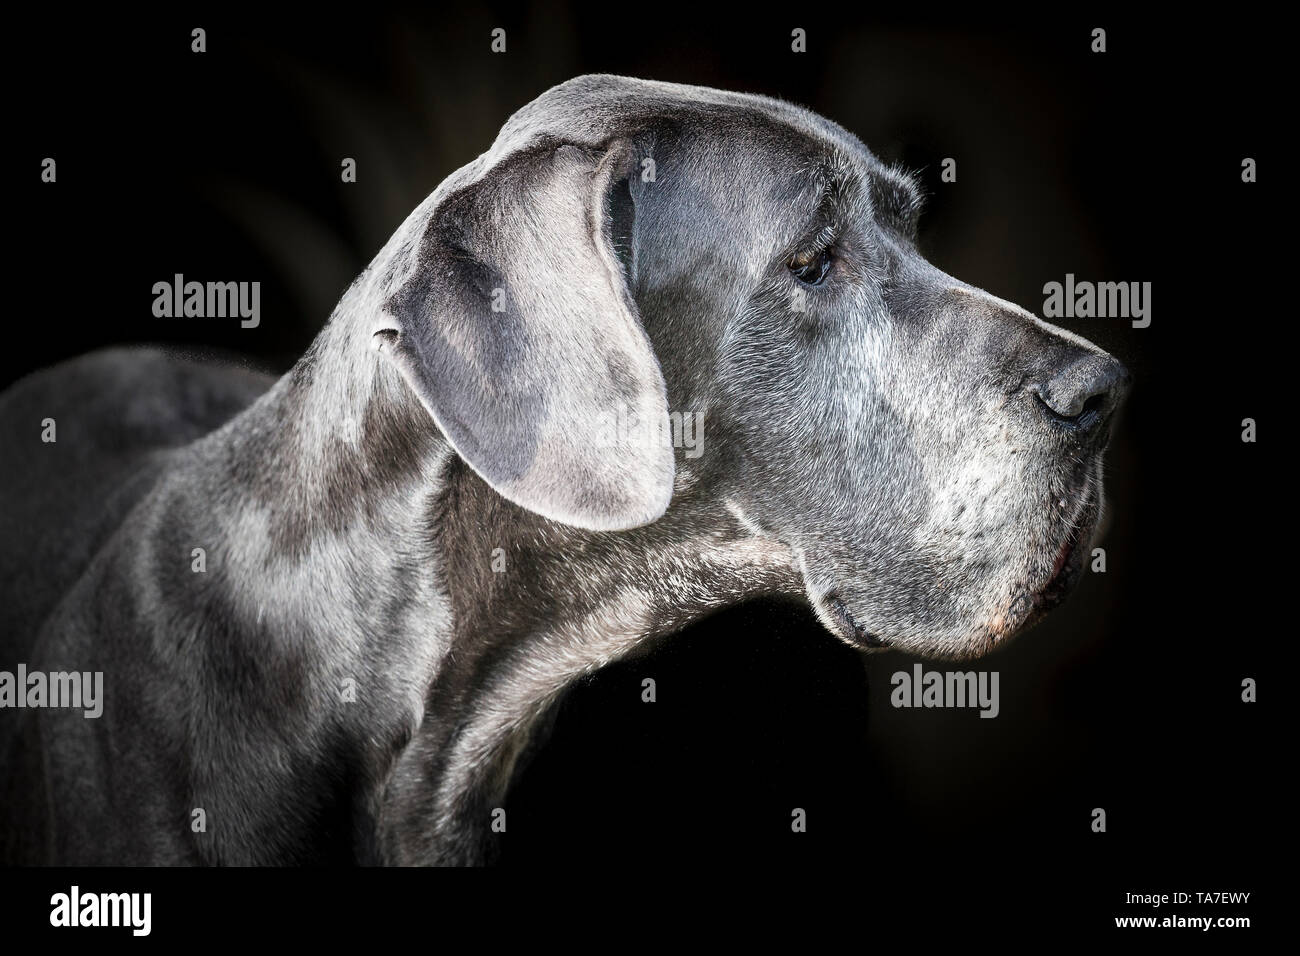 Great Dane. Portrait of old dog, seen against a black background. Germany Stock Photo